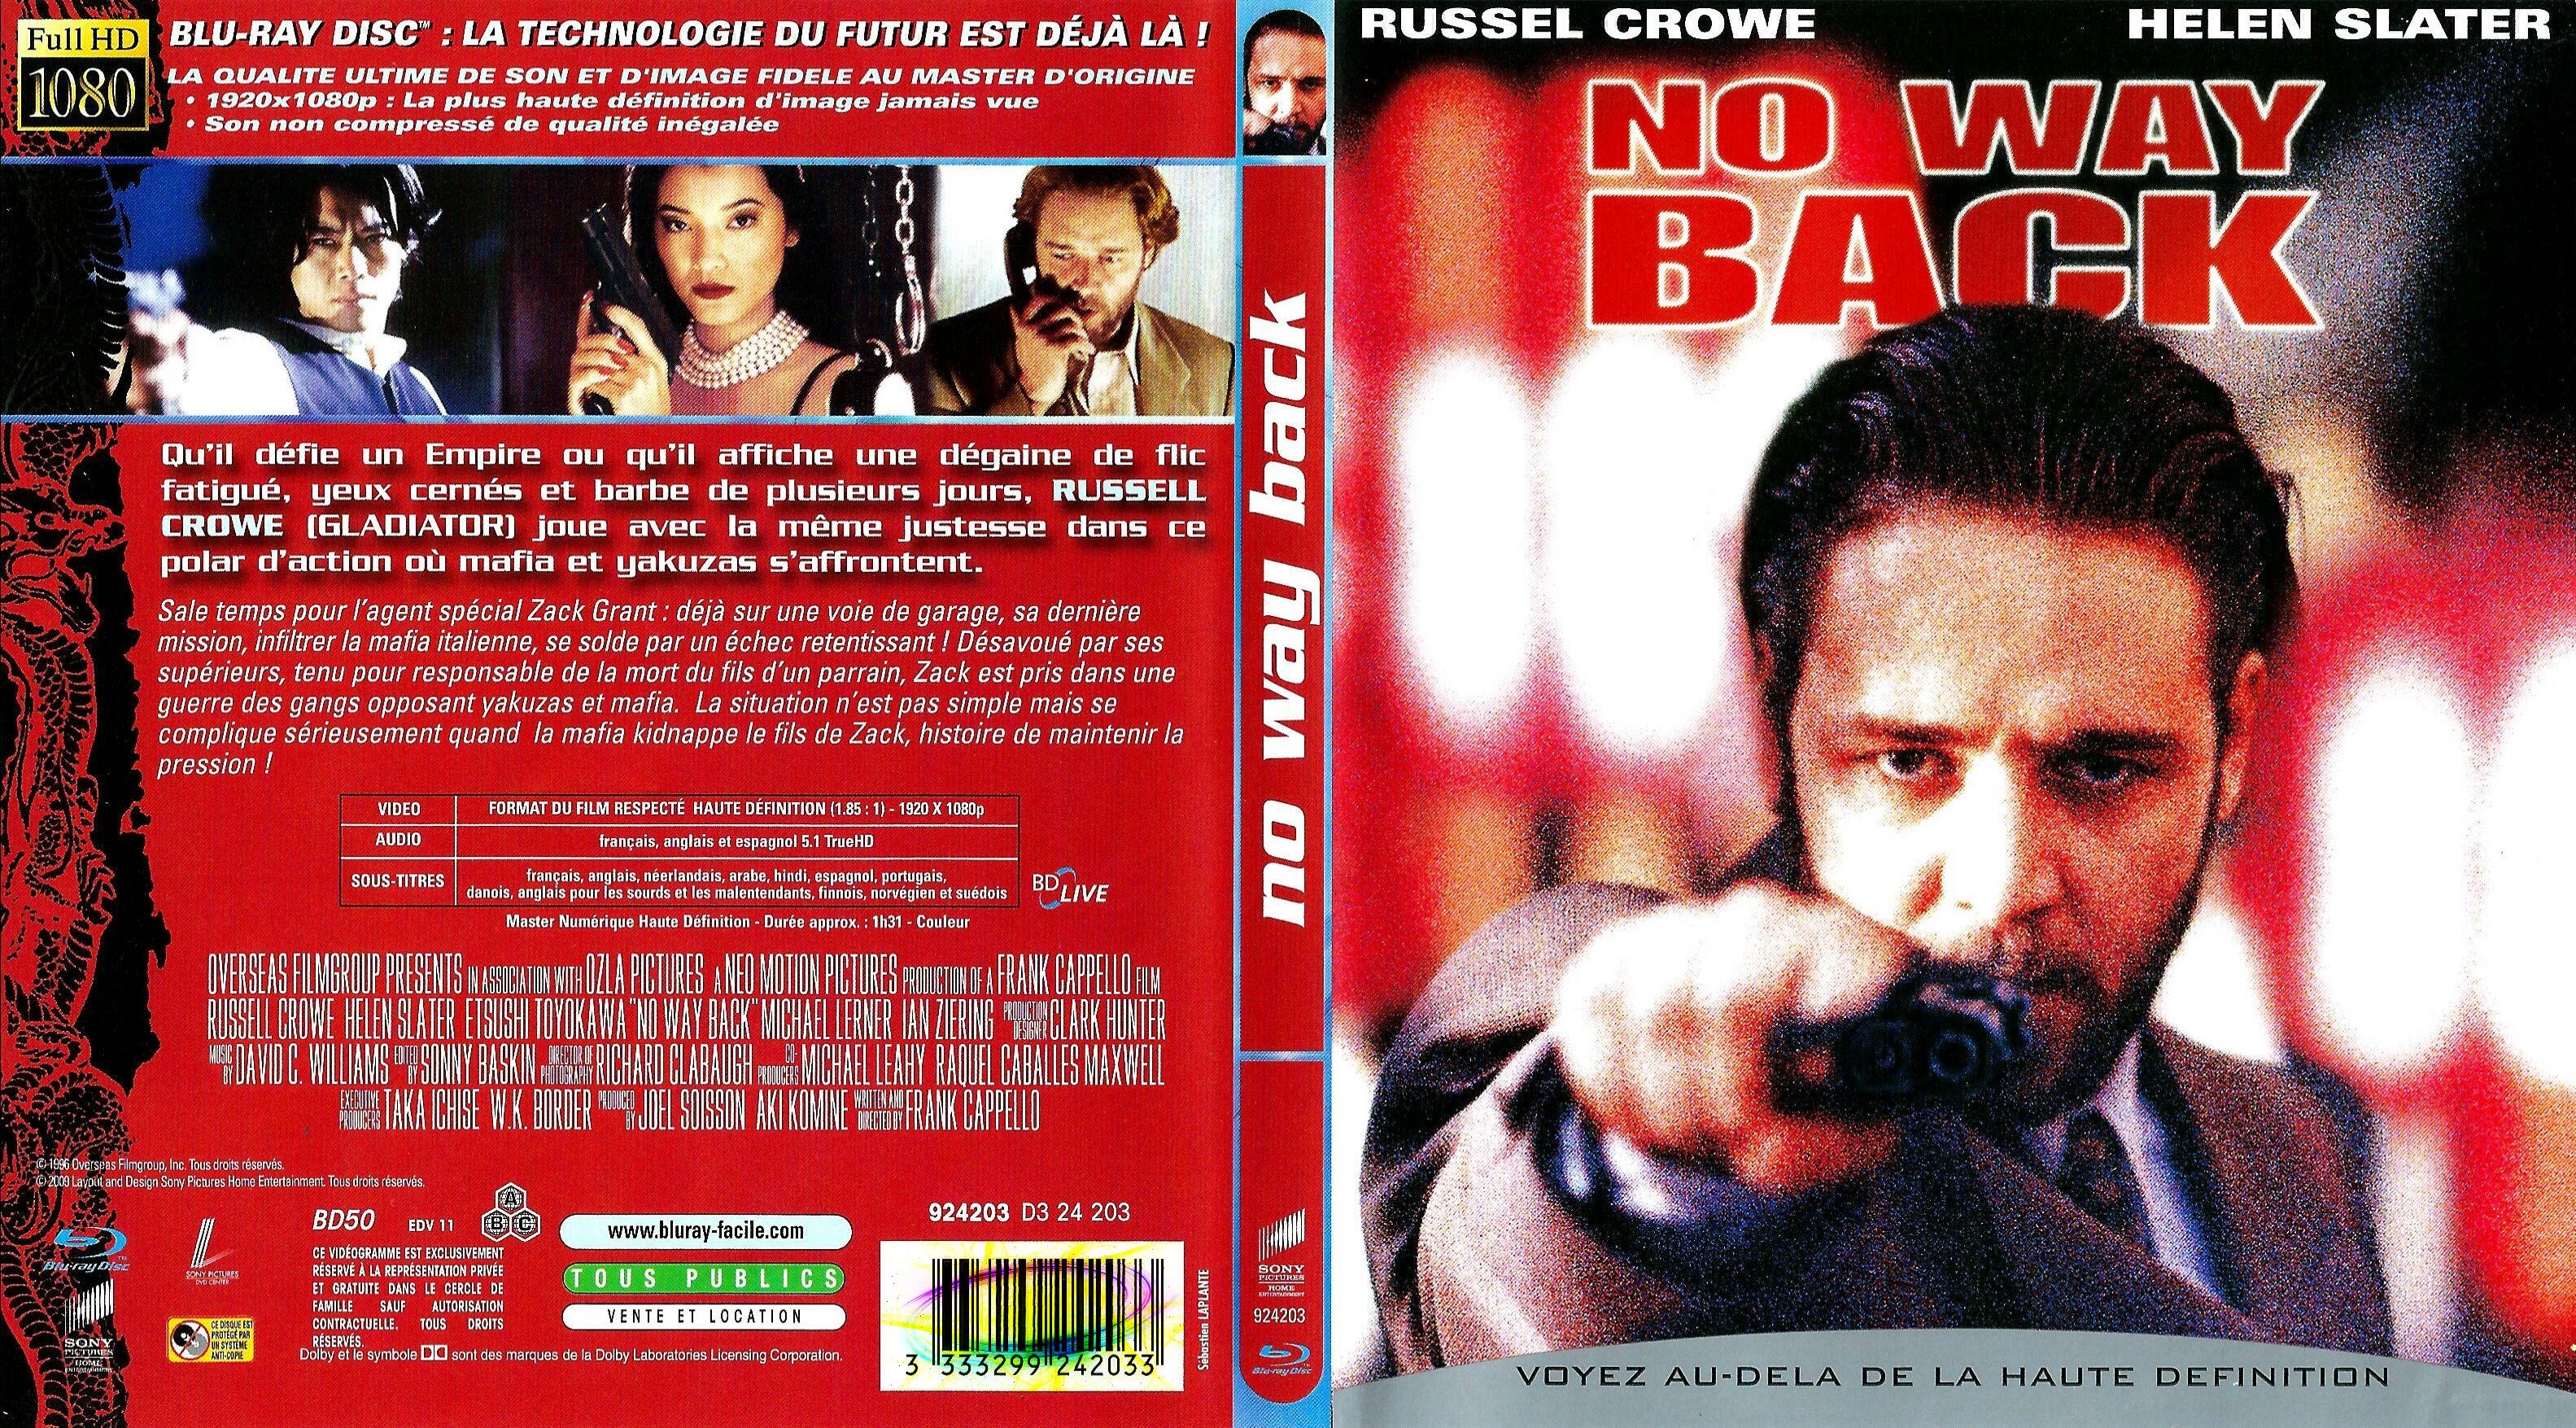 Jaquette DVD No way back (BLU-RAY)